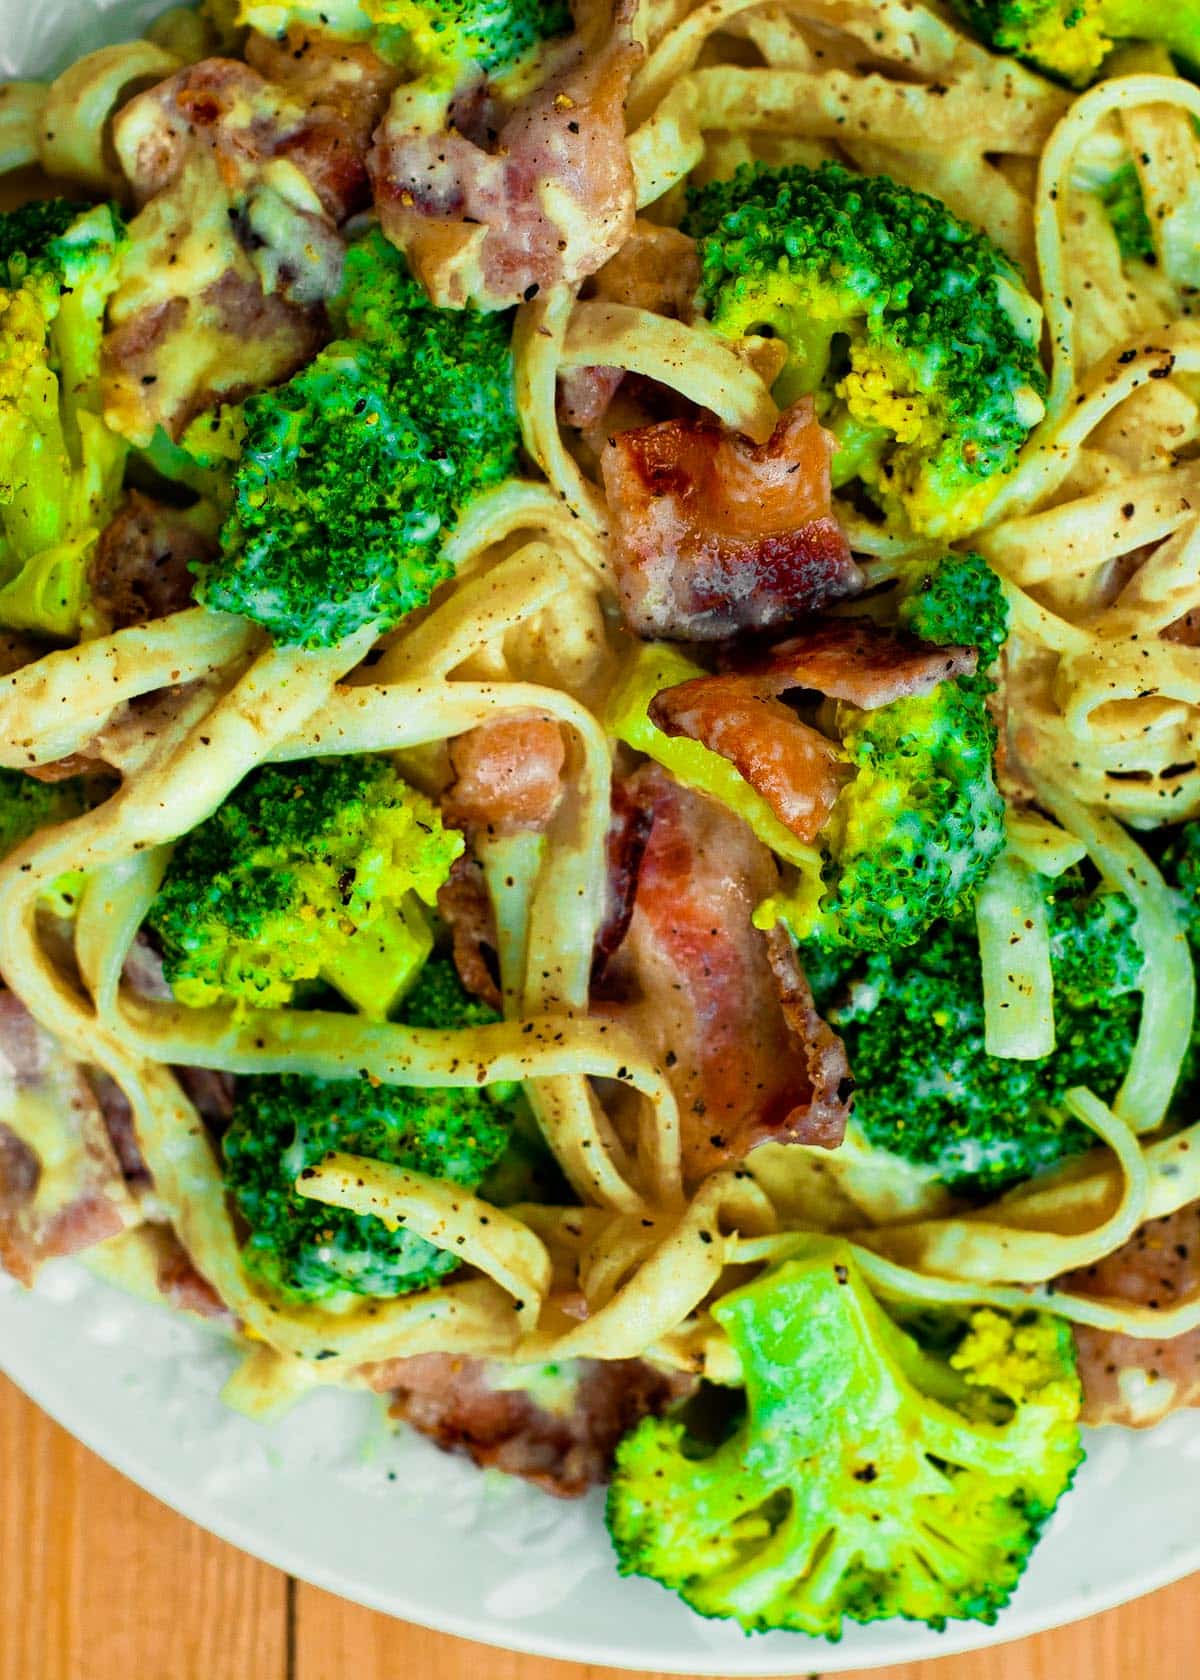 Bacon and Broccoli Pasta in Cheesy Sauce